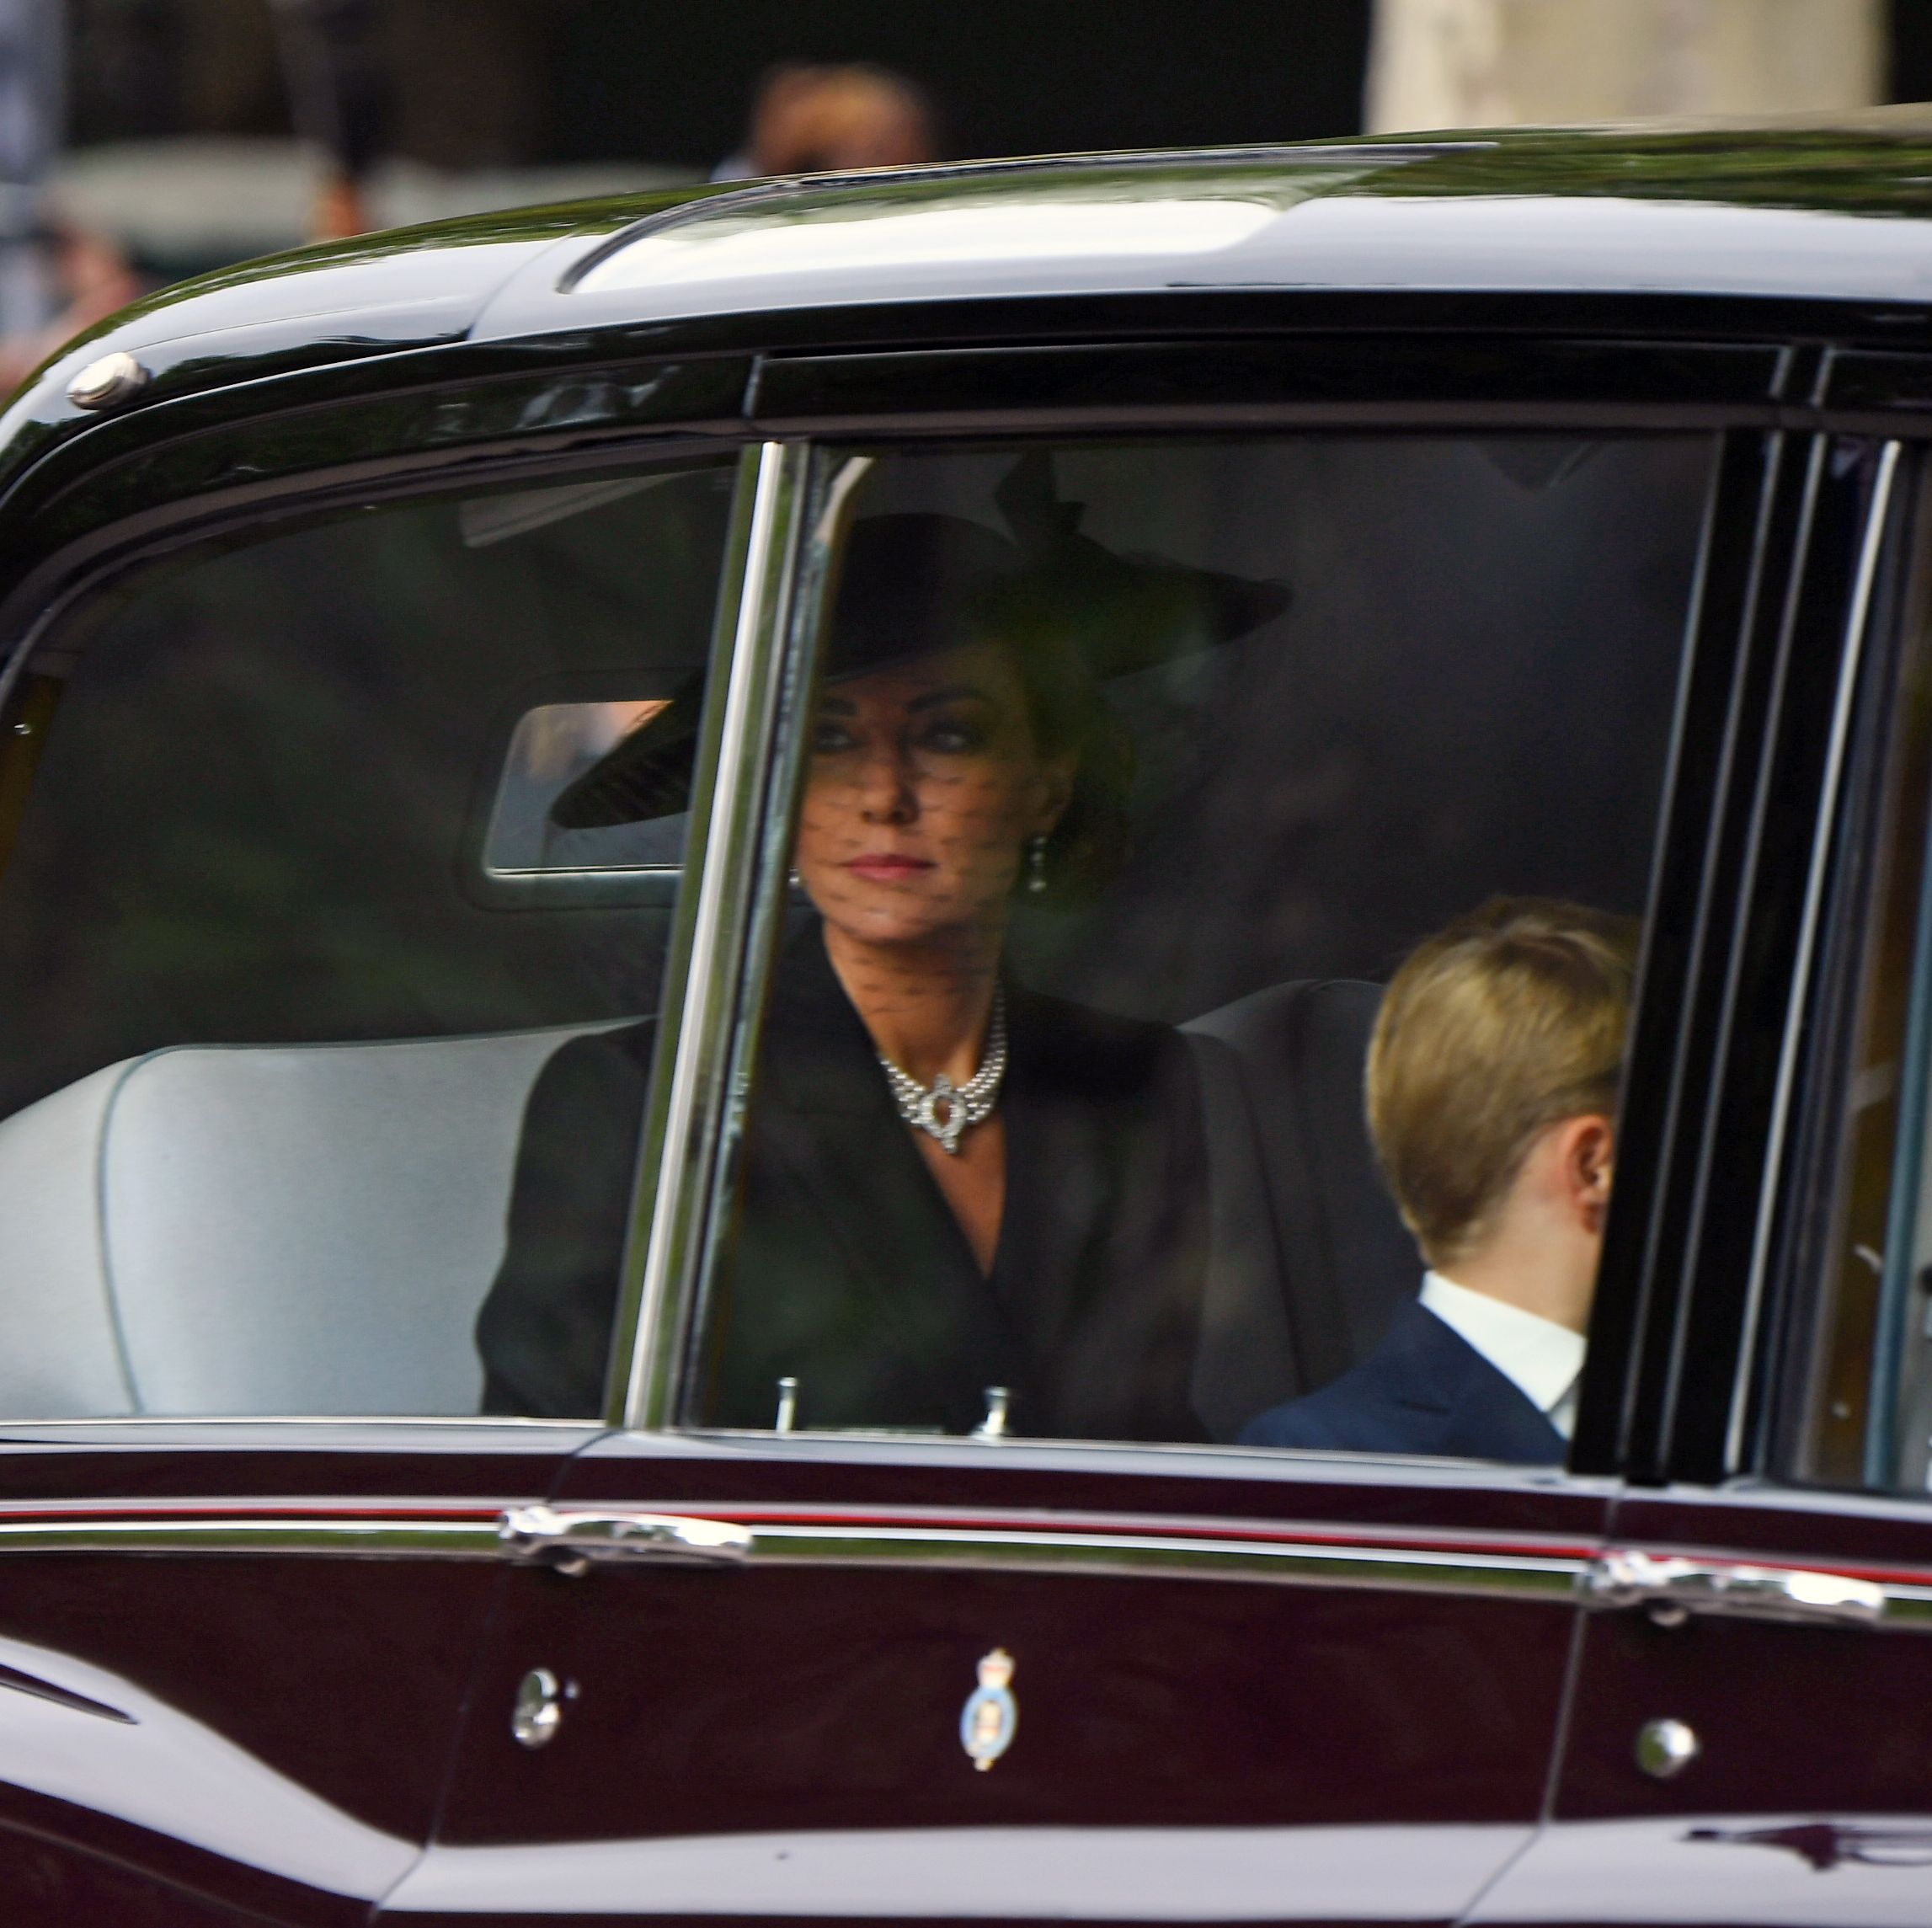 The Special Significance Behind the Pearl Choker Kate Middleton Wore to the Queen's Funeral